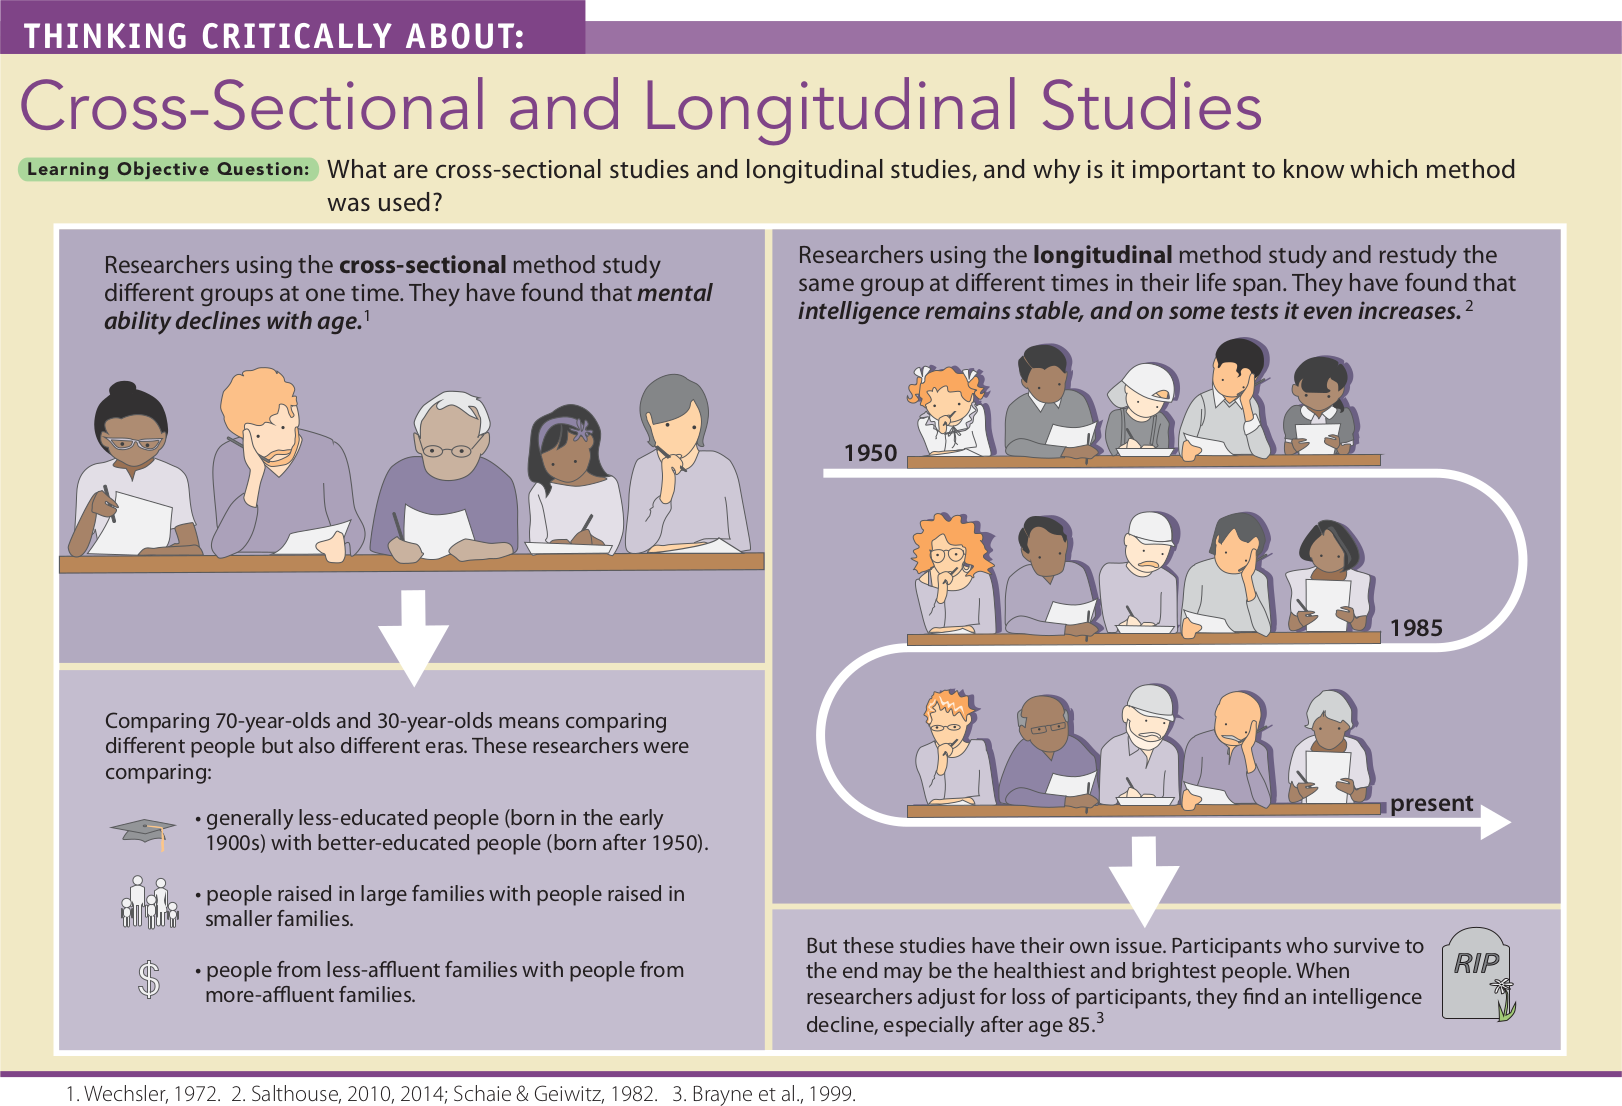 An infographic presents critical analysis for cross-sectional and longitudinal studies. You can read full description from the link below